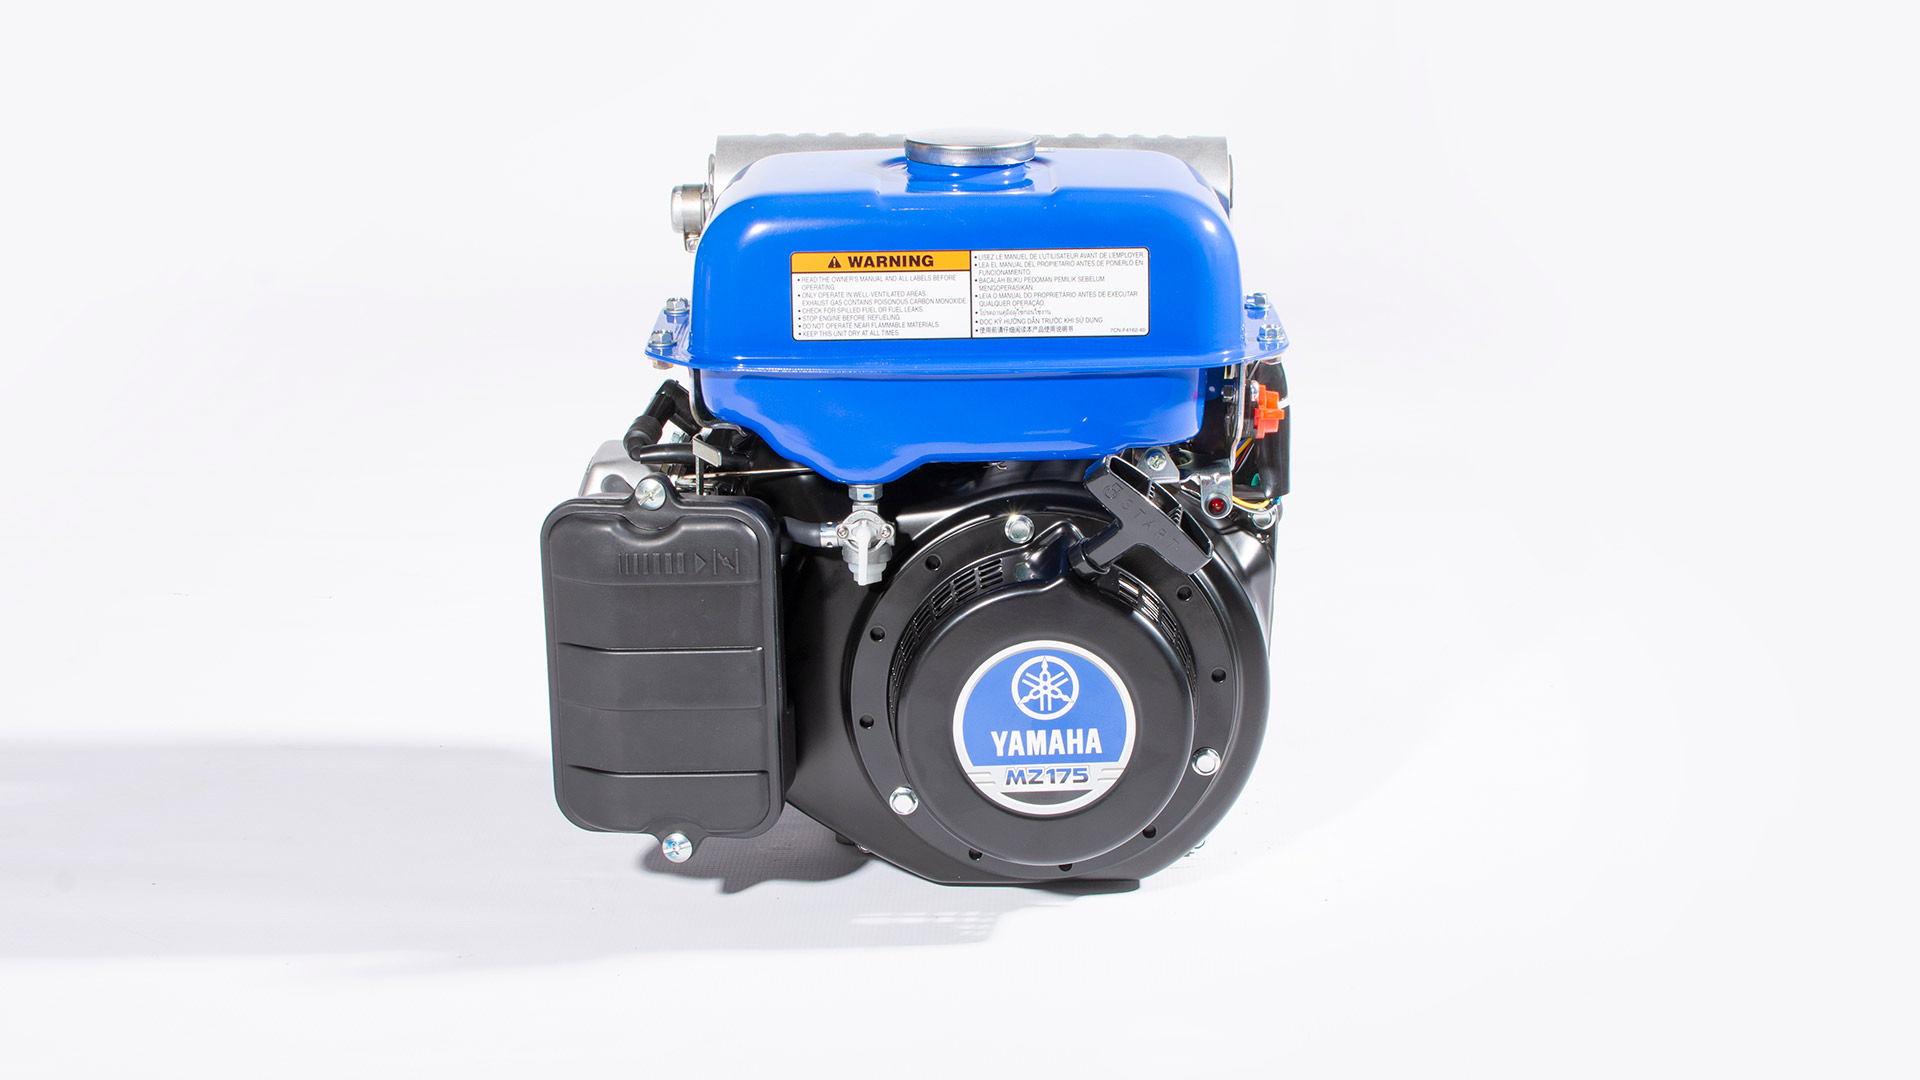 YAMAHA MZ175-A2B ENGINE  - MULTIPURPOSE PERFORMER:
Successfully tested performance on a variety of applications from medium to heavy-duty mowers, medium to high performance pumps, and a variety of generators, skids, air compressors and many other applications.